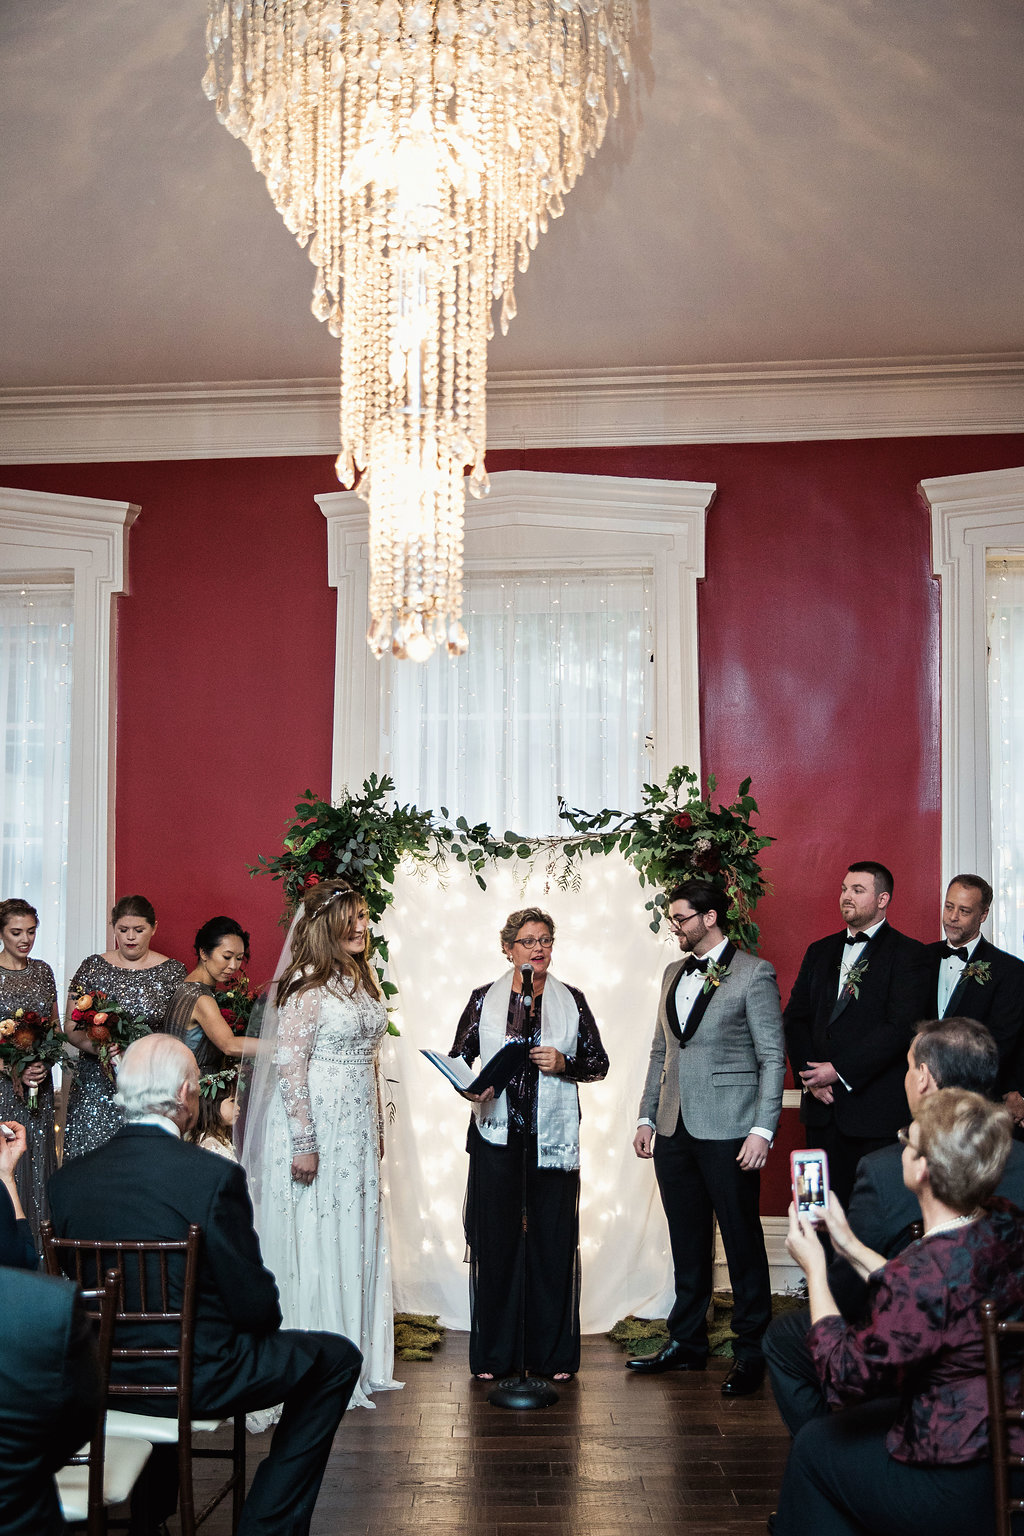 Ceremony at India House in NYC in a red room with chandelier